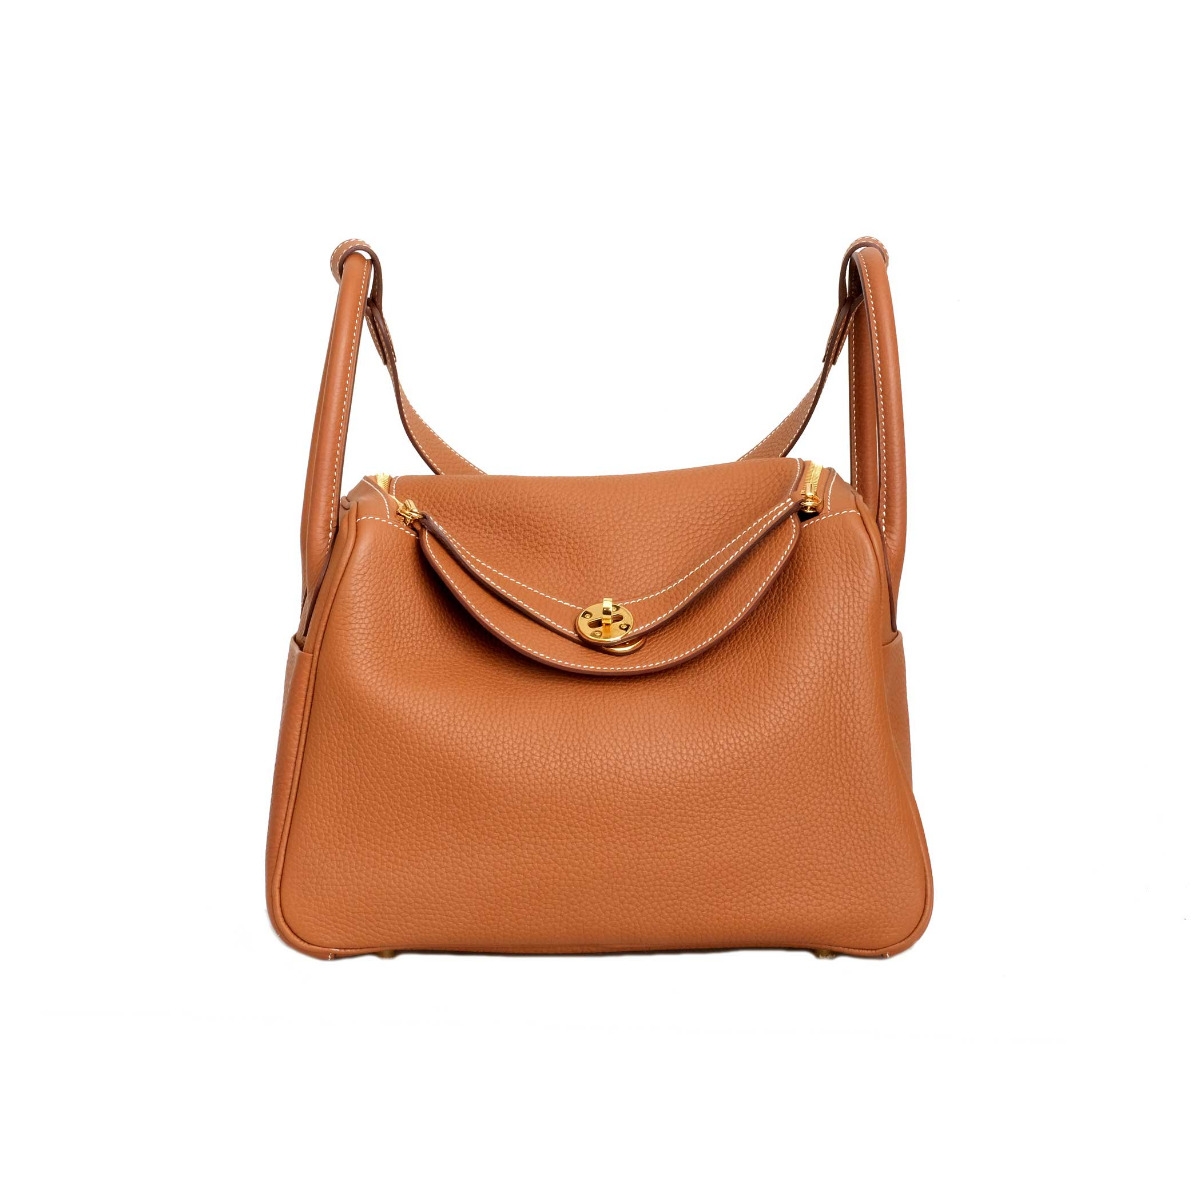 Hermes Lindy 30 Taurillon Clemence